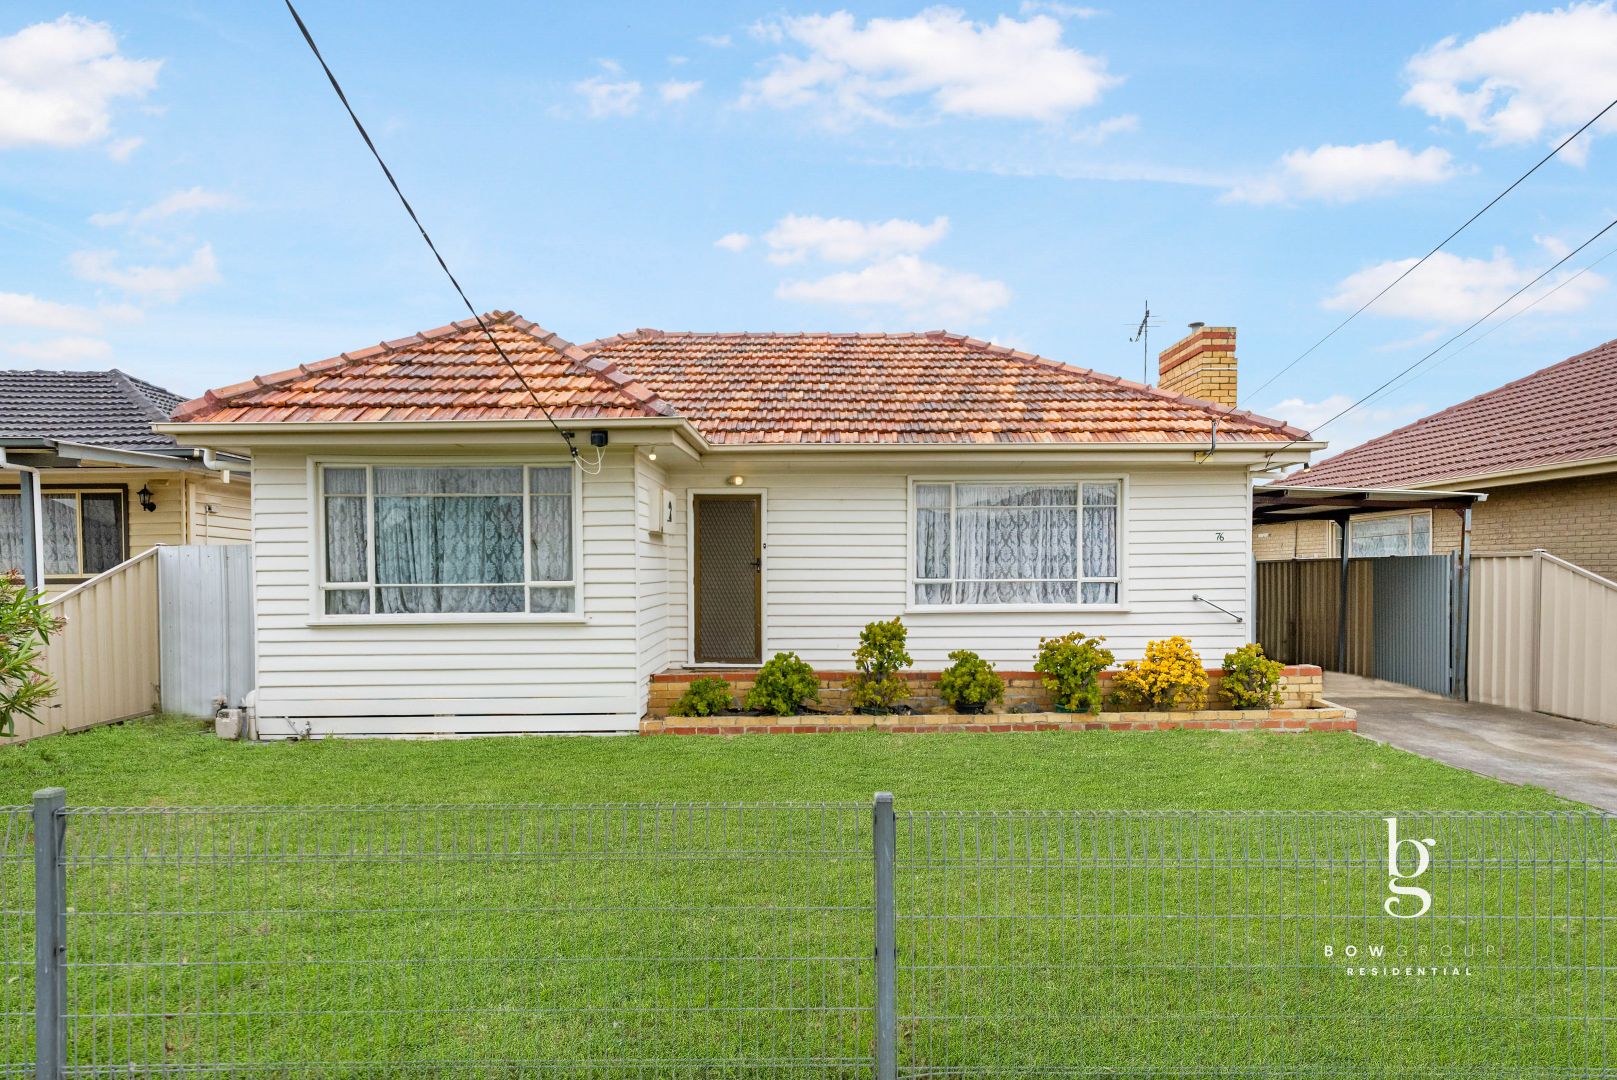 76 View Street, St Albans VIC 3021